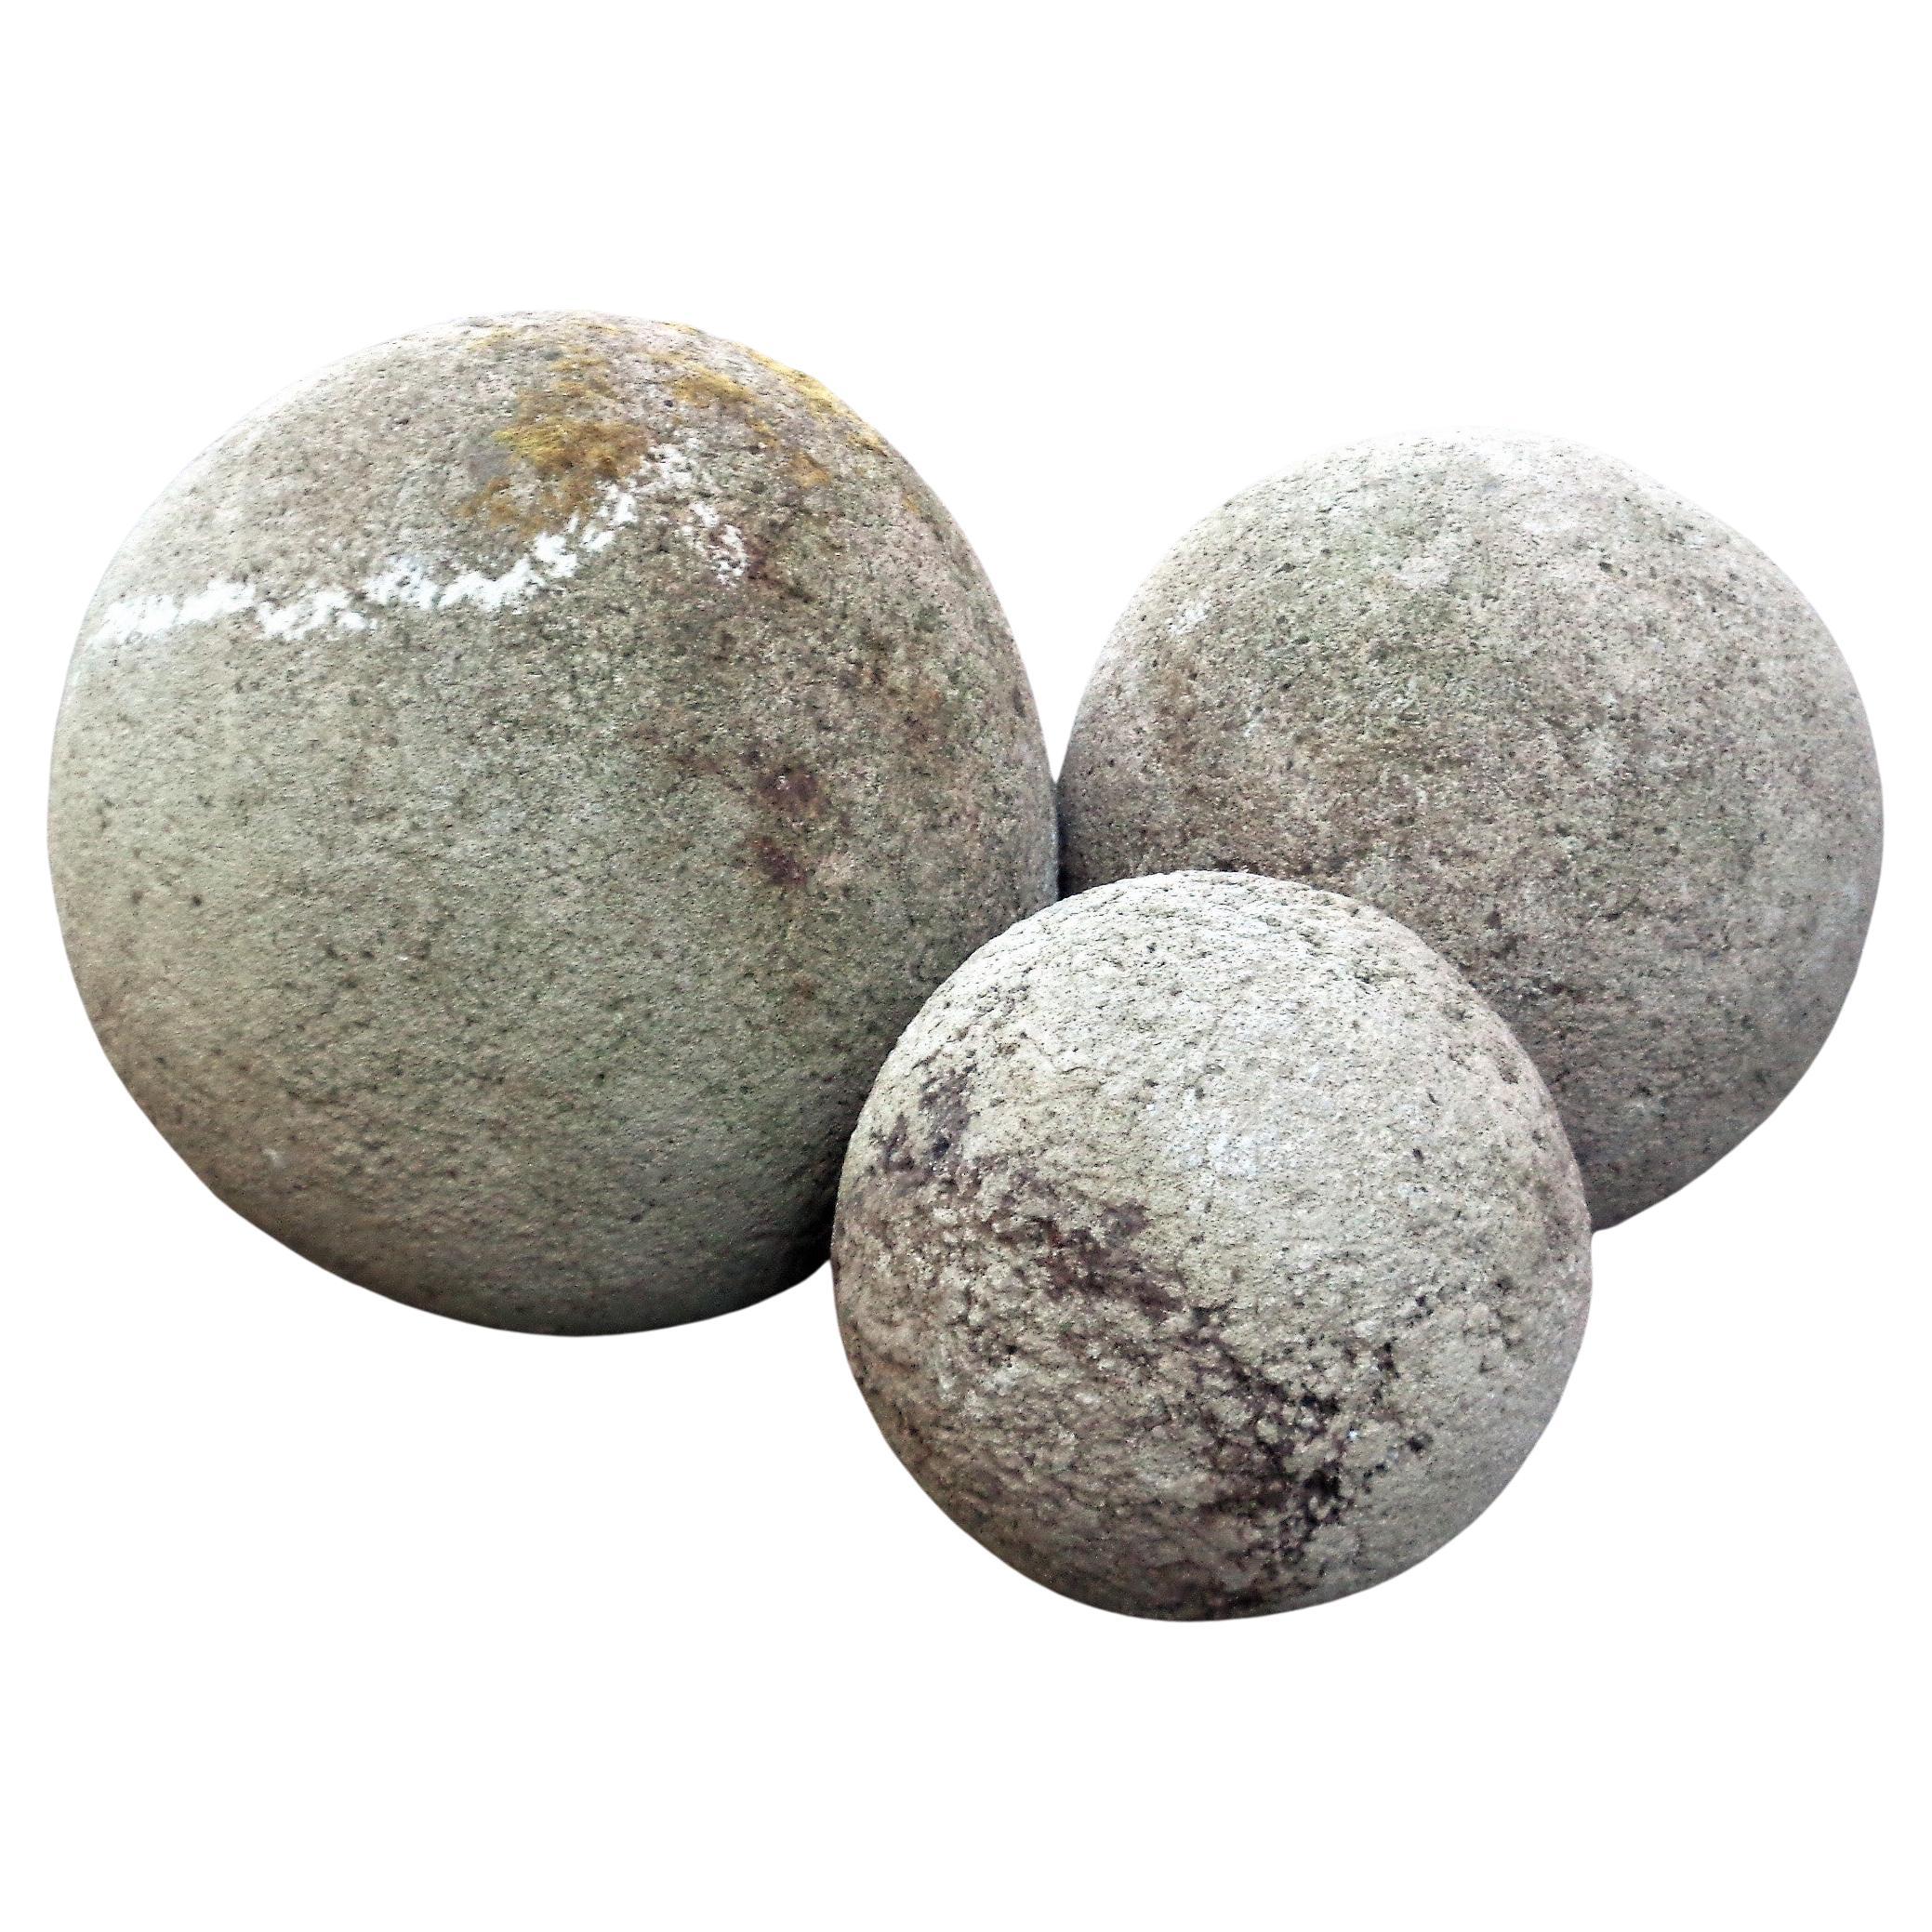 A graduated size grouping of three hand crafted crushed stone aggregrate garden spheres in nicely aged weathered surface w/ areas of light greening and some lichen growth. Look at all pictures and read condition report in comment section.